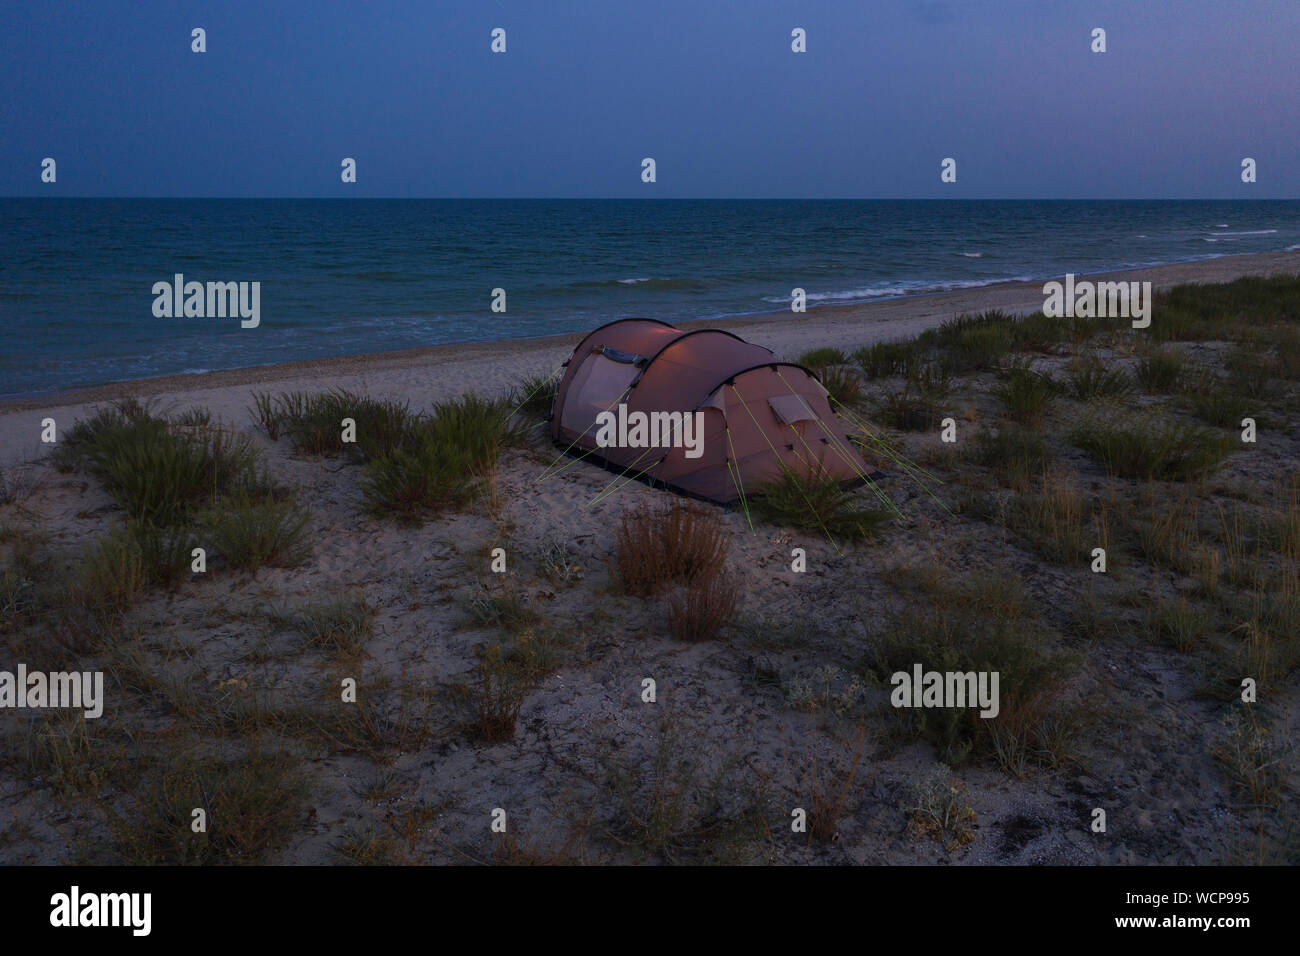 a camping tent on a beach near Black sea at evening Stock Photo